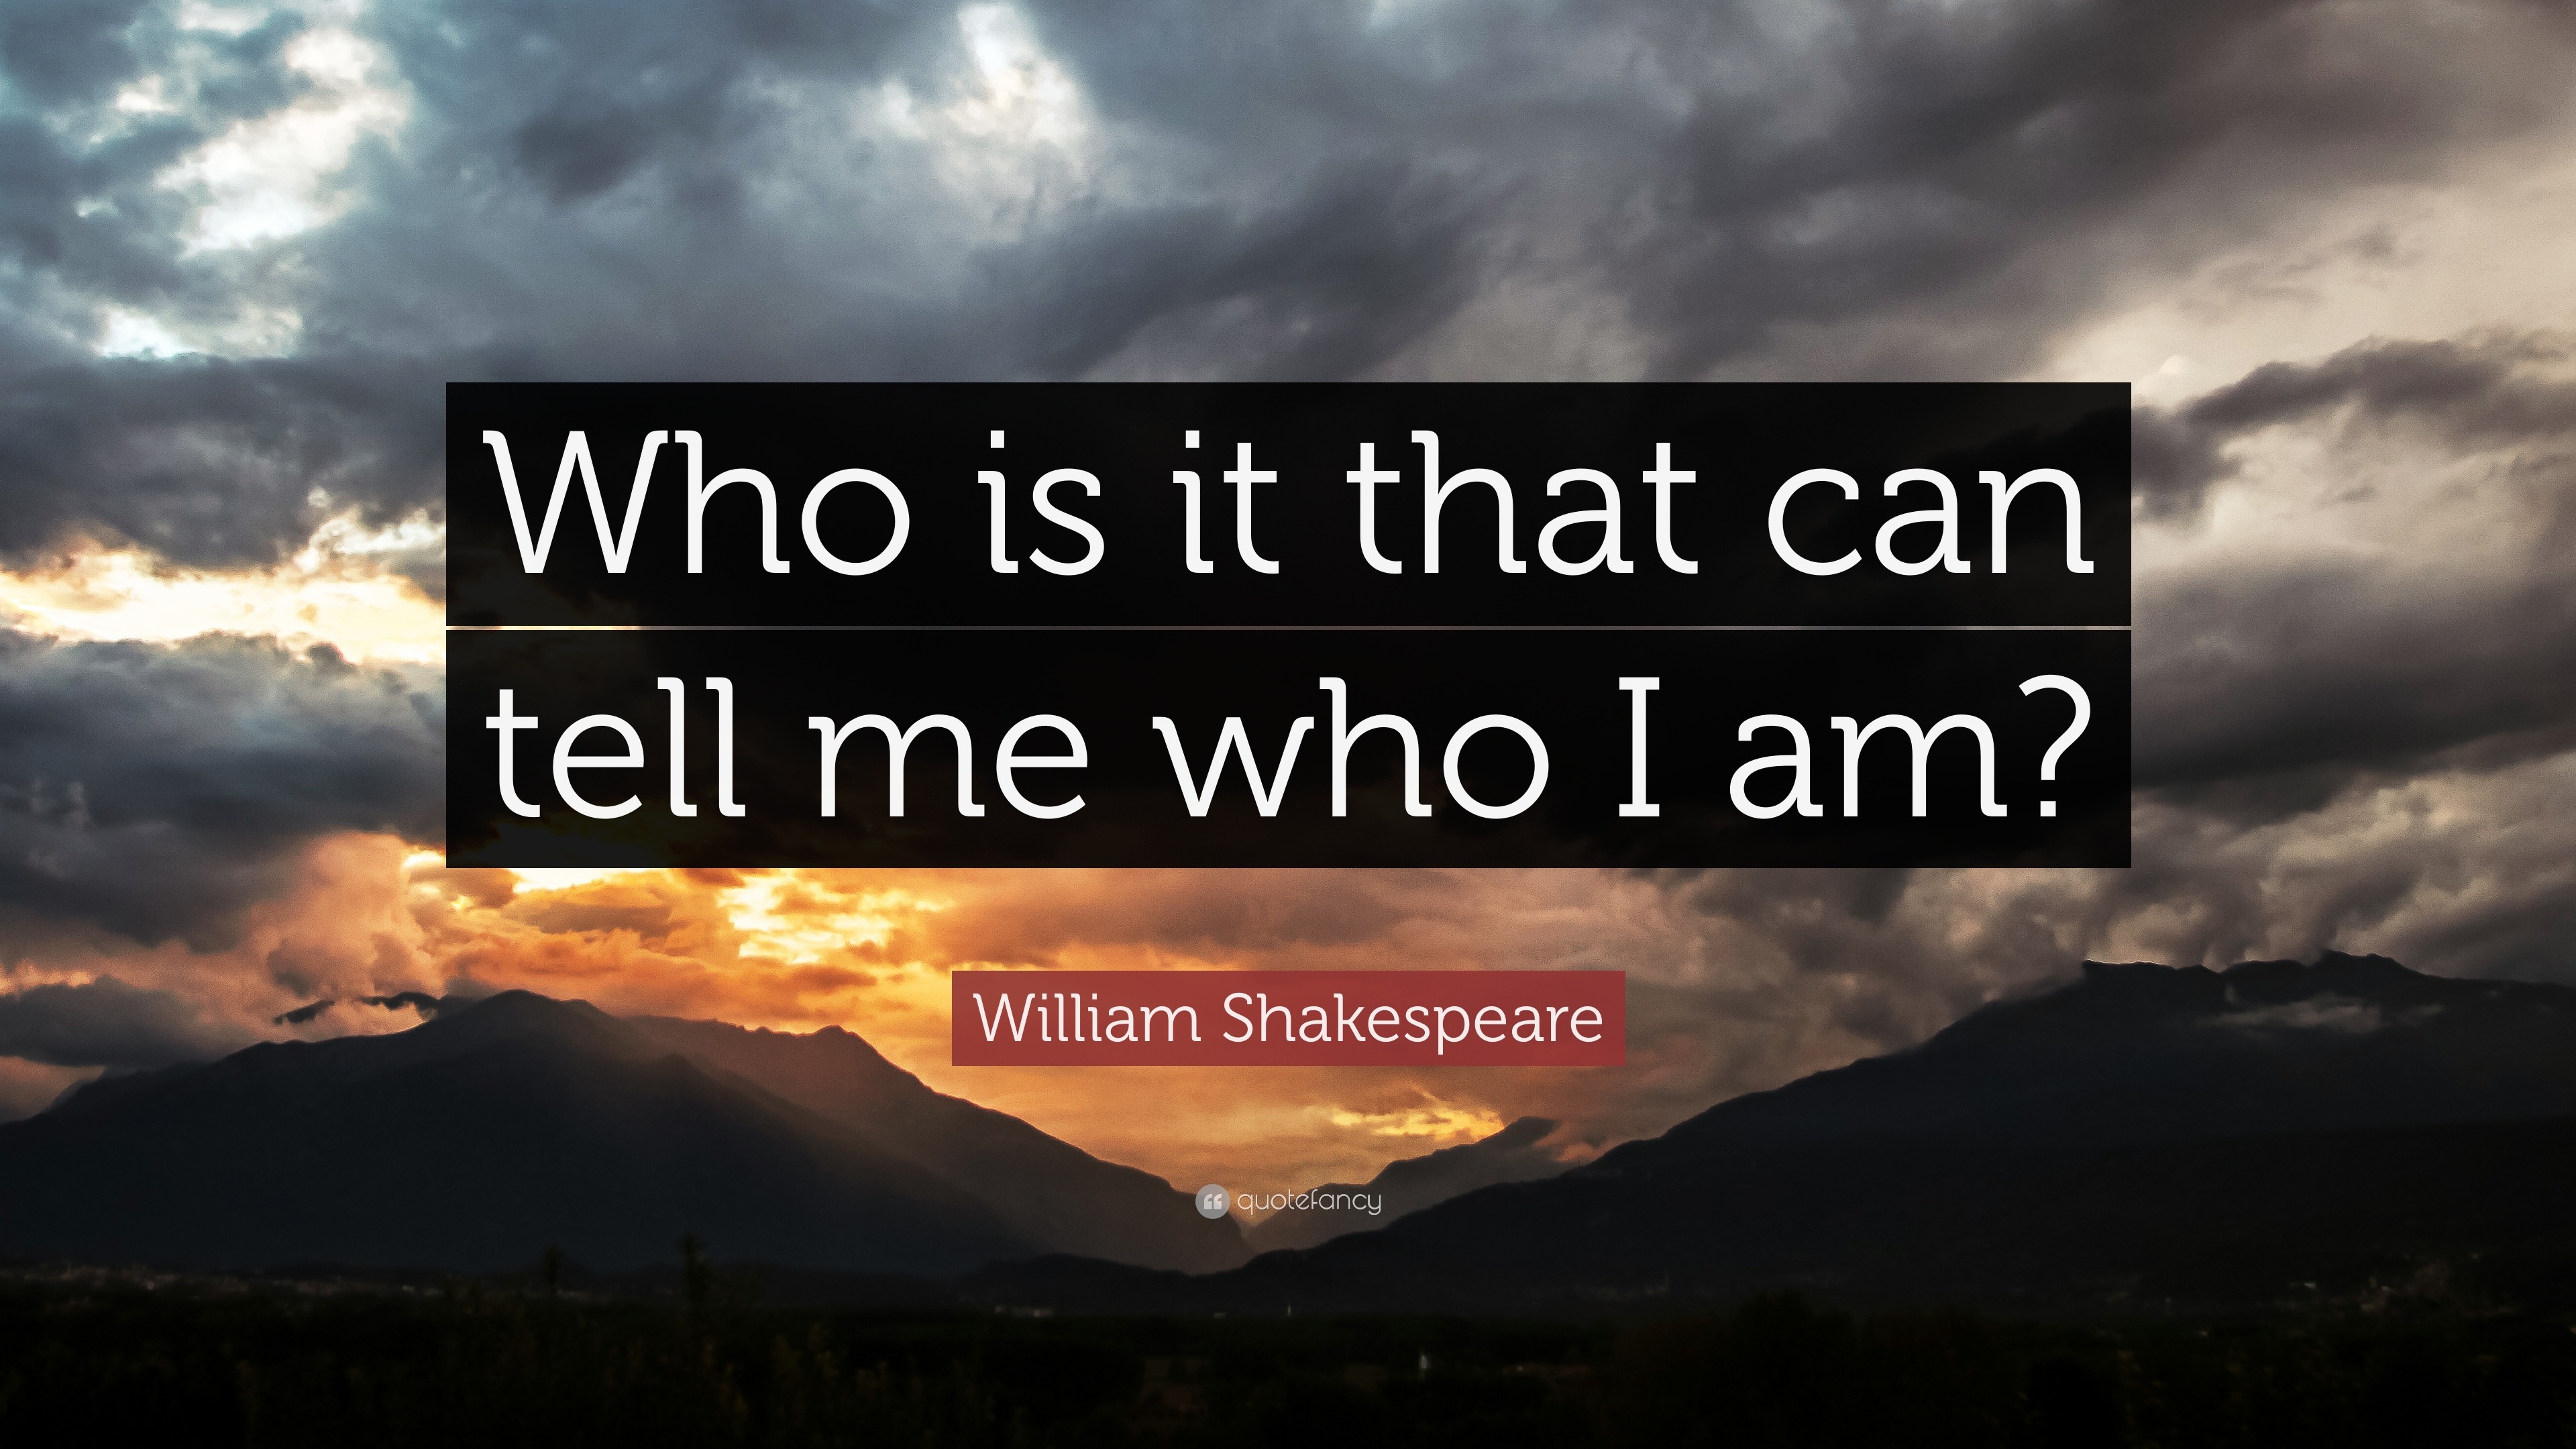 William Shakespeare Quote “Who is it that can tell me who I am?” (18